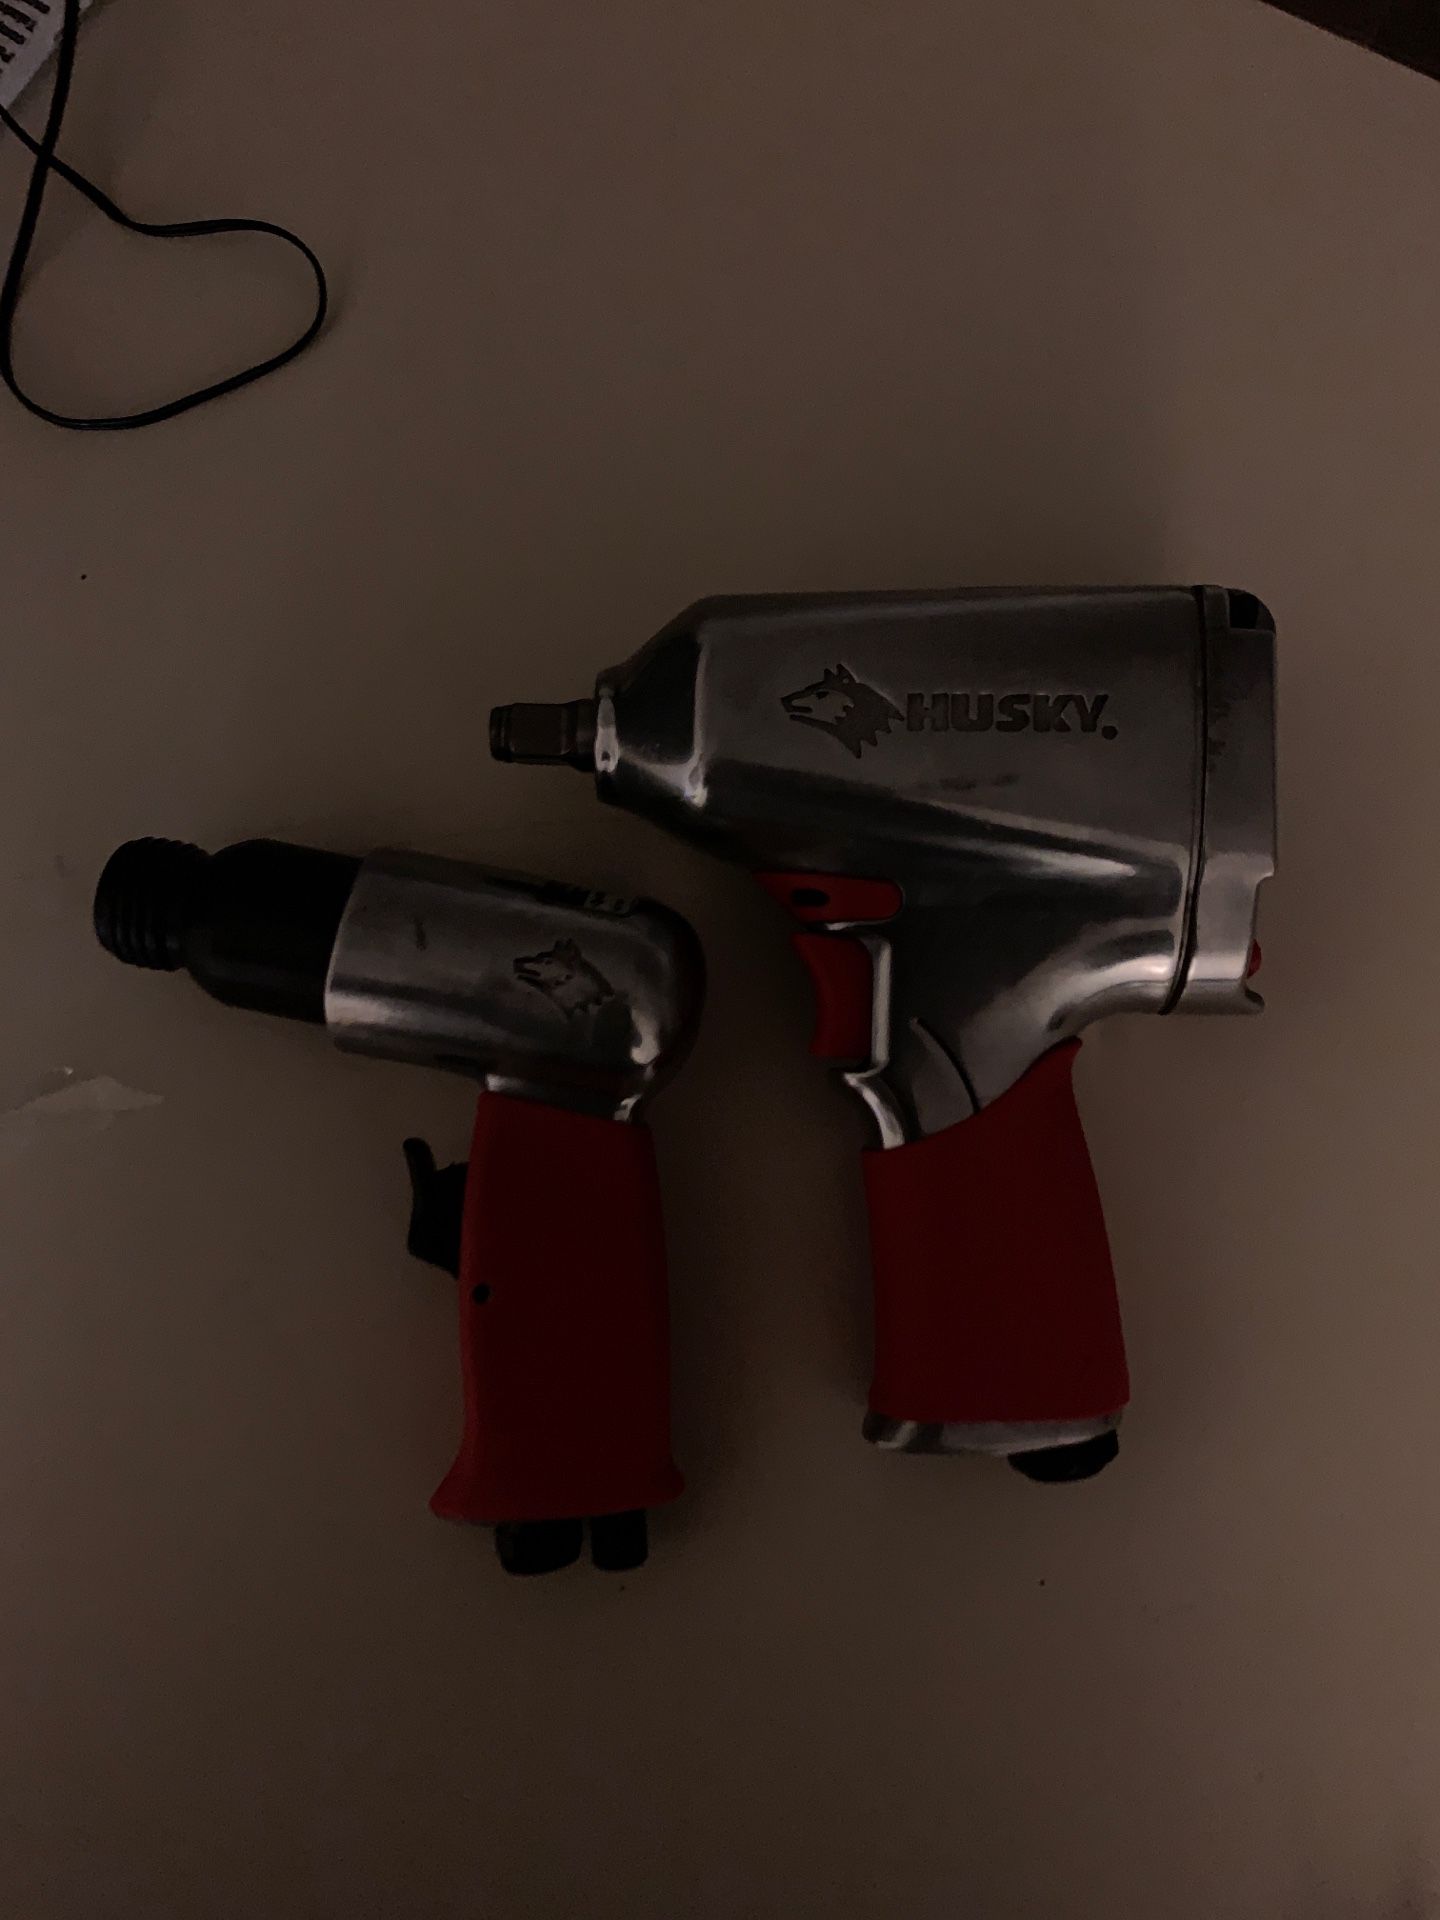 Impact wrench and air hammer